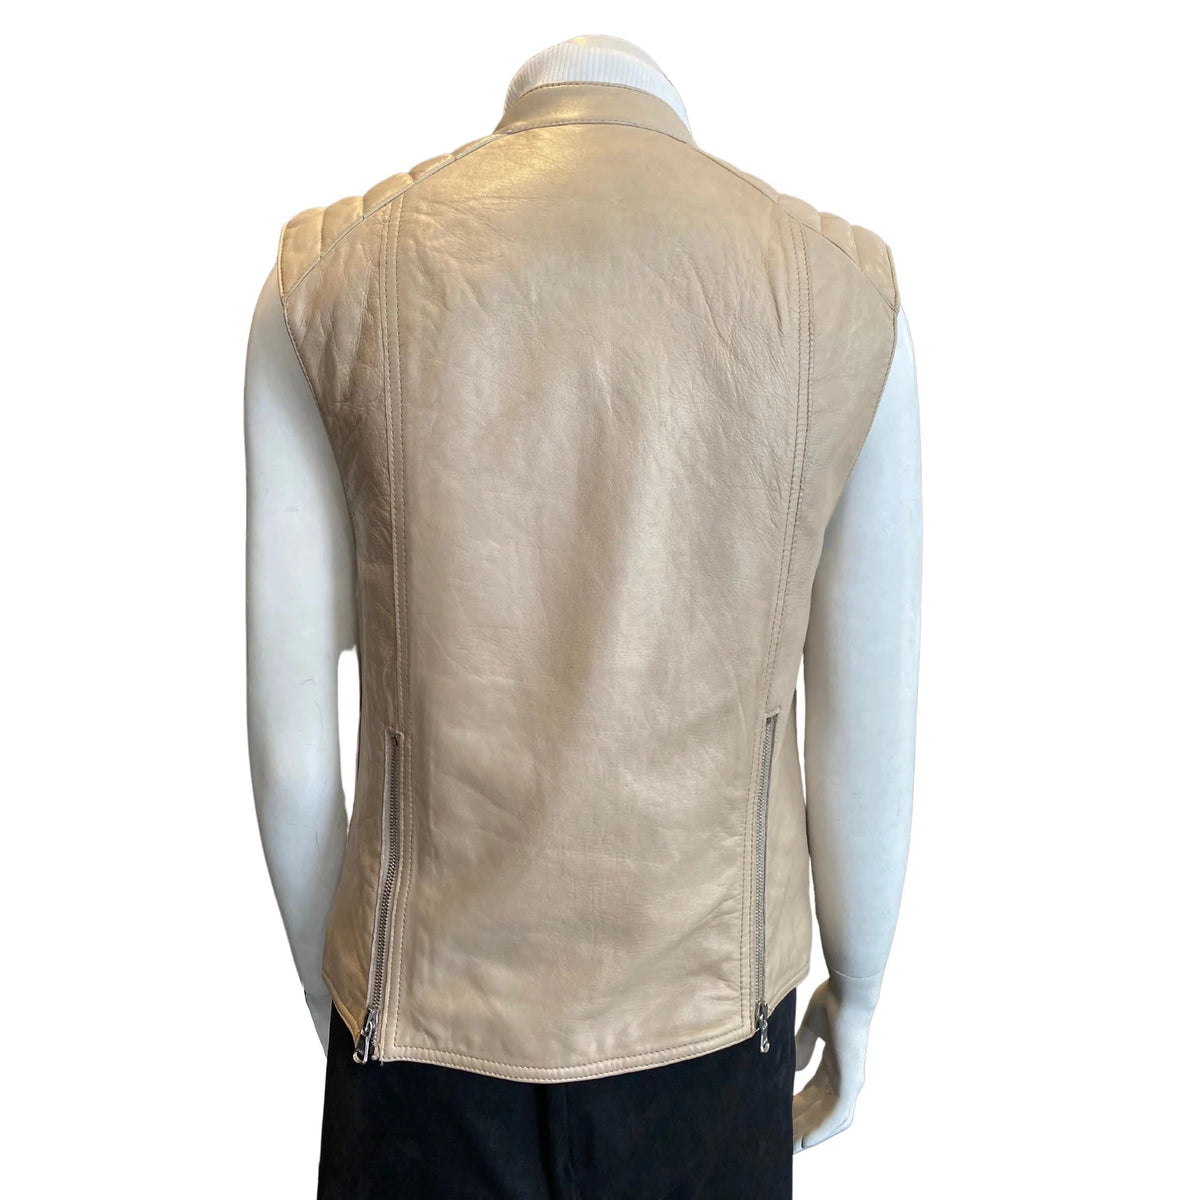 Pre-Owned PHILLIP LIM Leather Vest | Small - US 2 - theREMODA